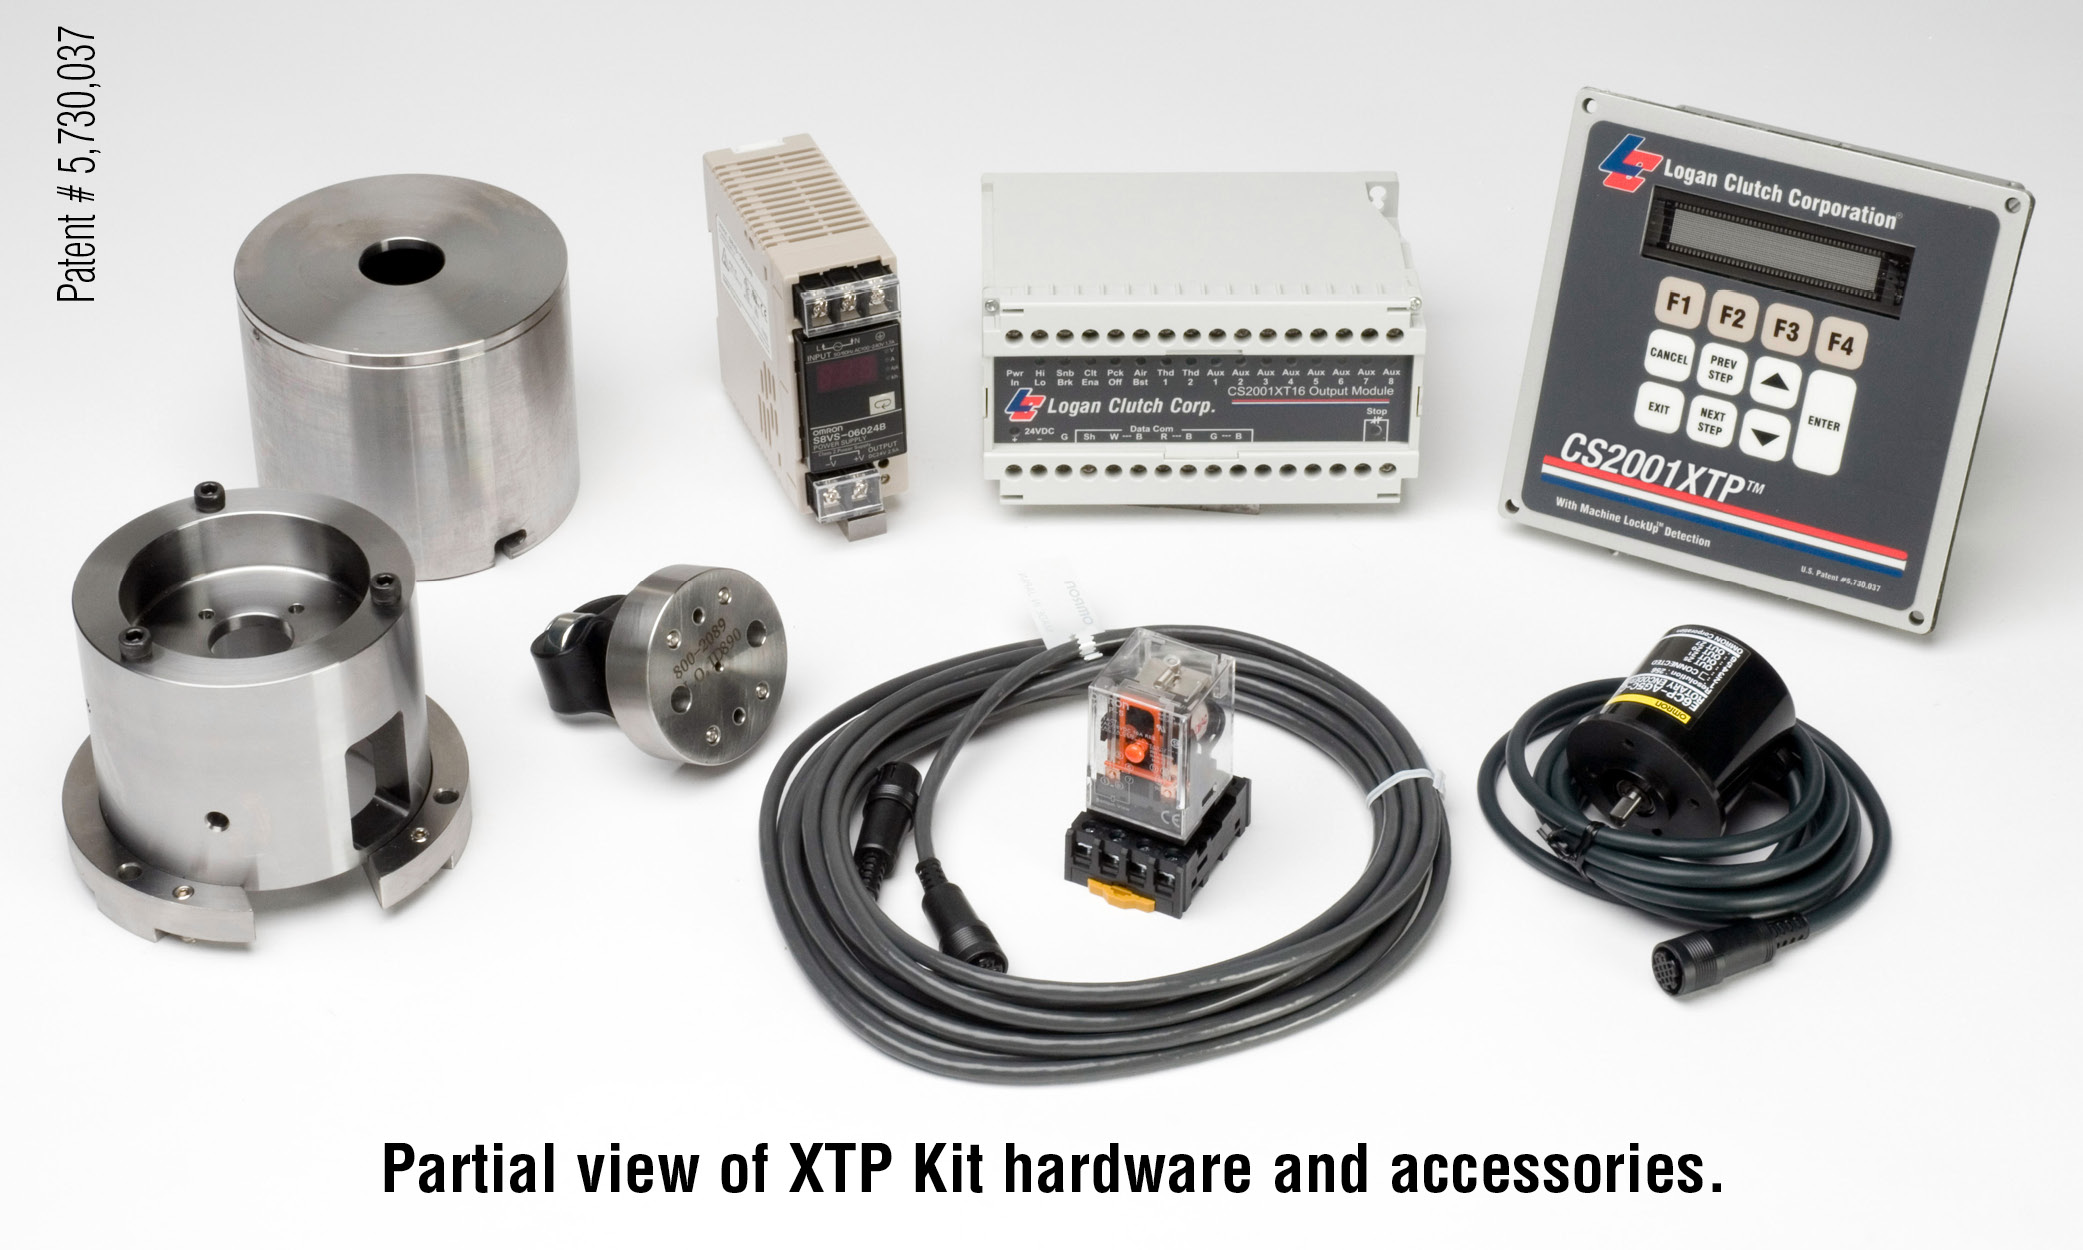 XT Kit hardware and accessories